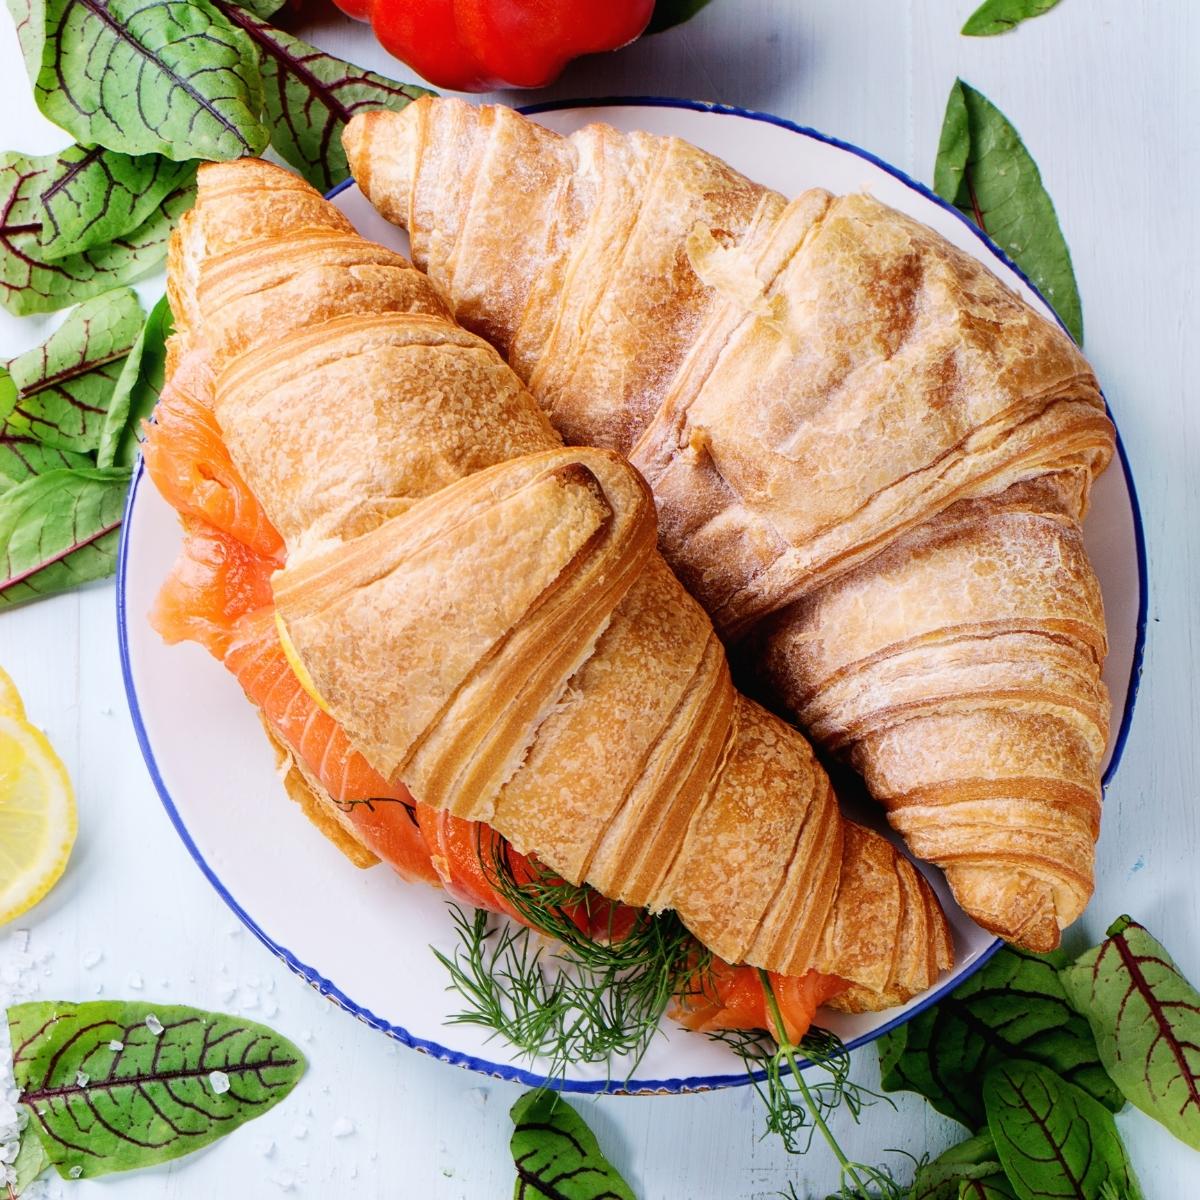 2 croissant sandwiches stuffed with red salmon and surrounded by spinach leaves.